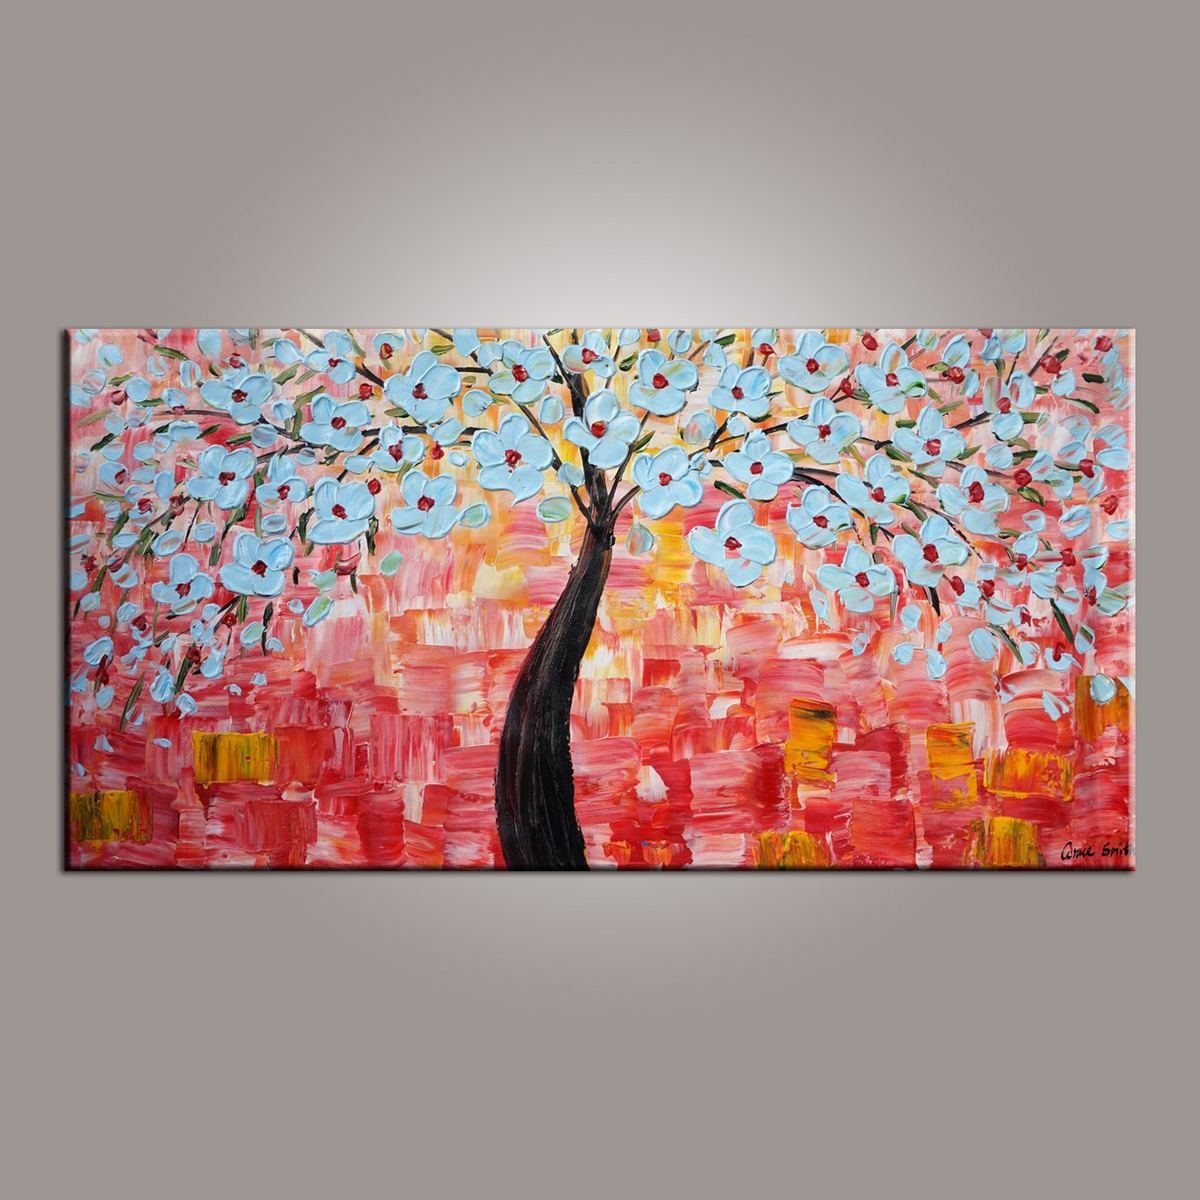 Flower Art, Abstract Art Painting, Tree Painting, Painting on Sale, Canvas Wall Art, Bedroom Wall Art, Canvas Art, Modern Art, Contemporary Art-Art Painting Canvas